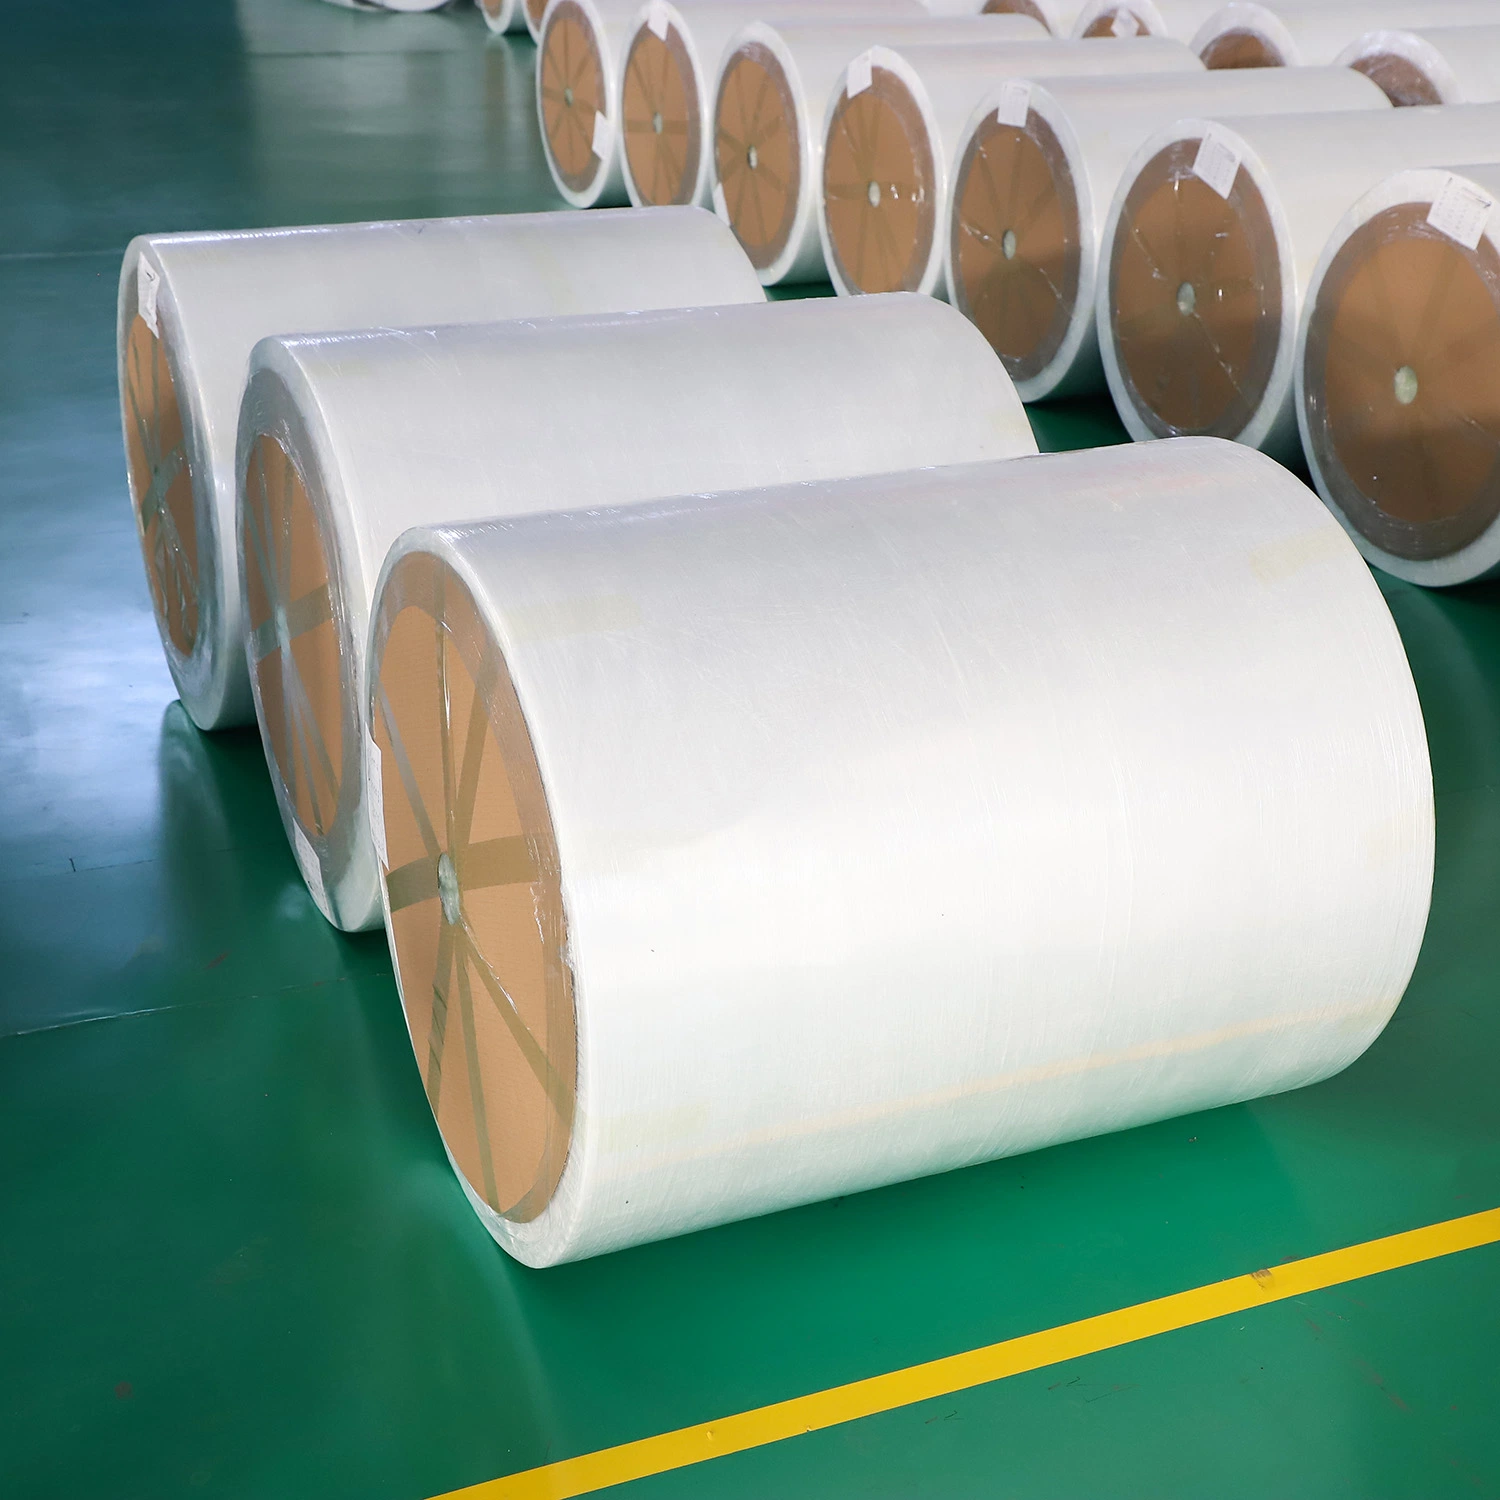 Original Factory Viscose/Polyester Spunlace Nonwoven Fabric Rolls for Cleaning Wipe